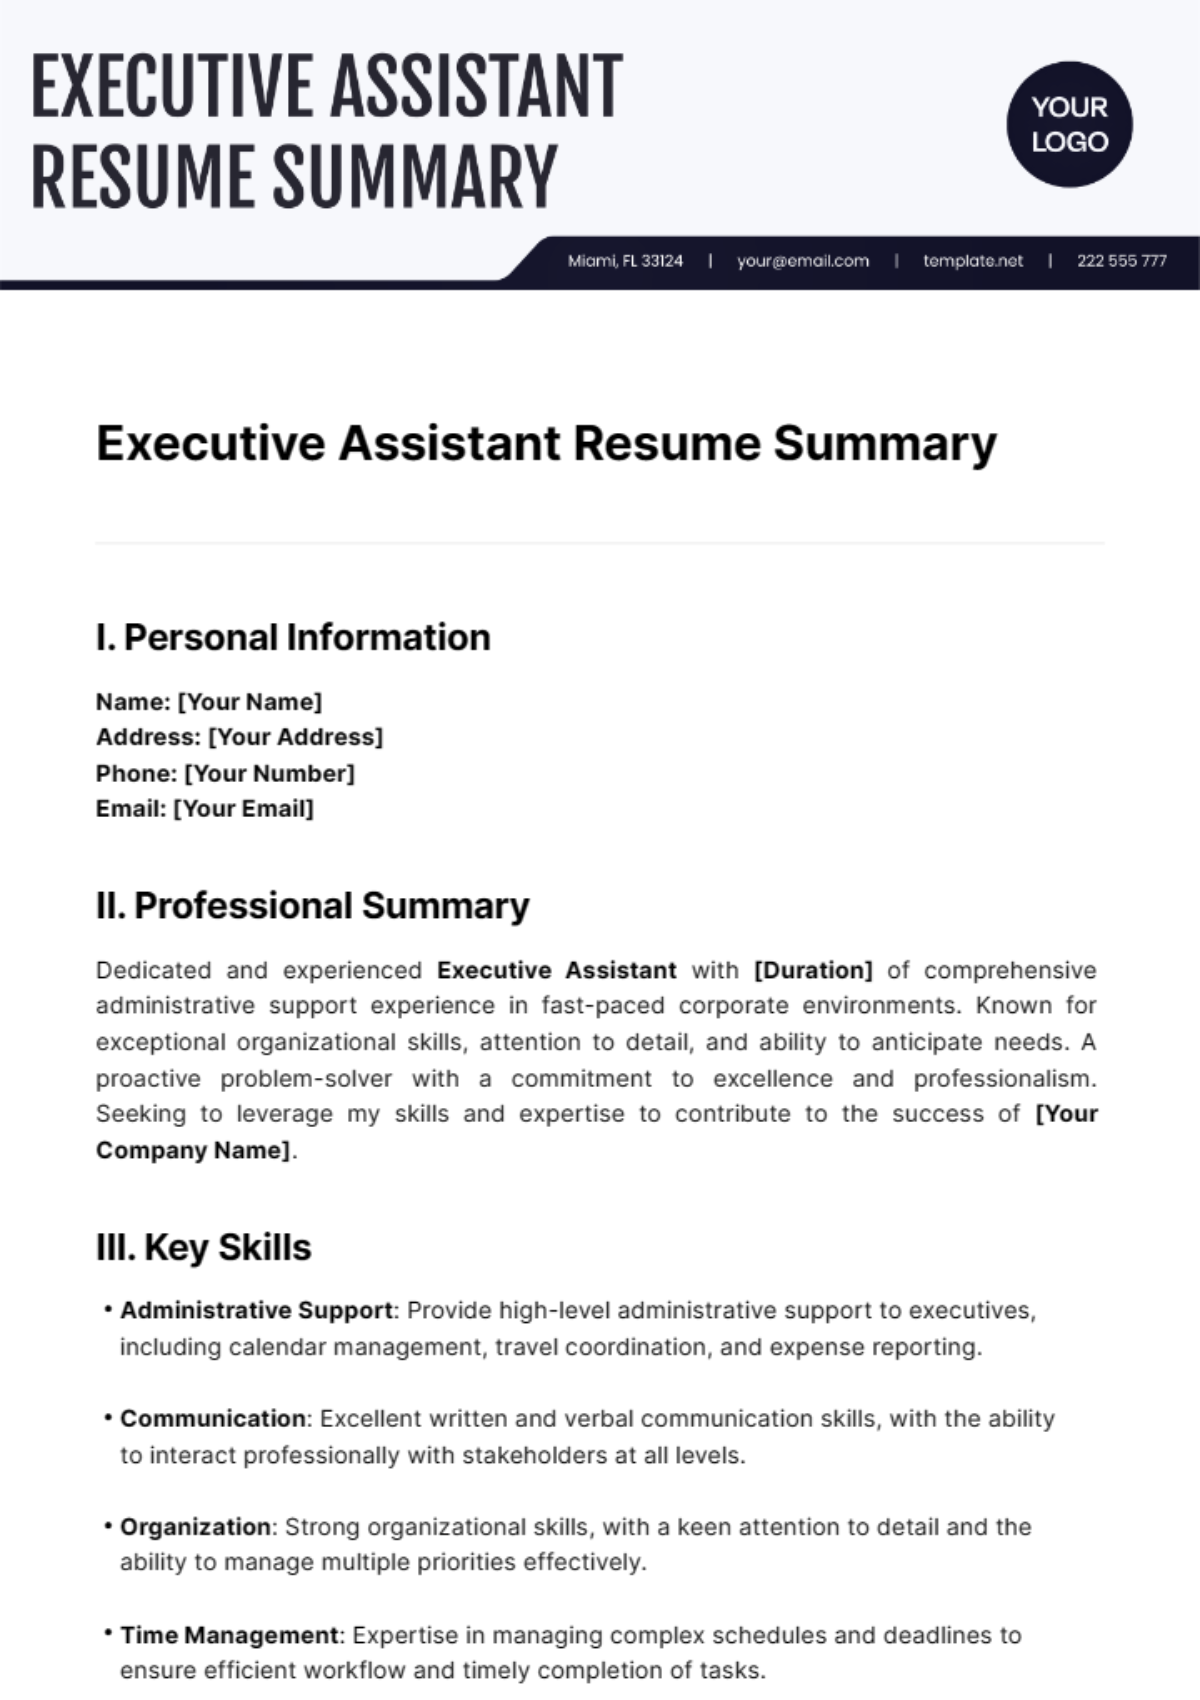 Free Executive Assistant Resume Summary Template